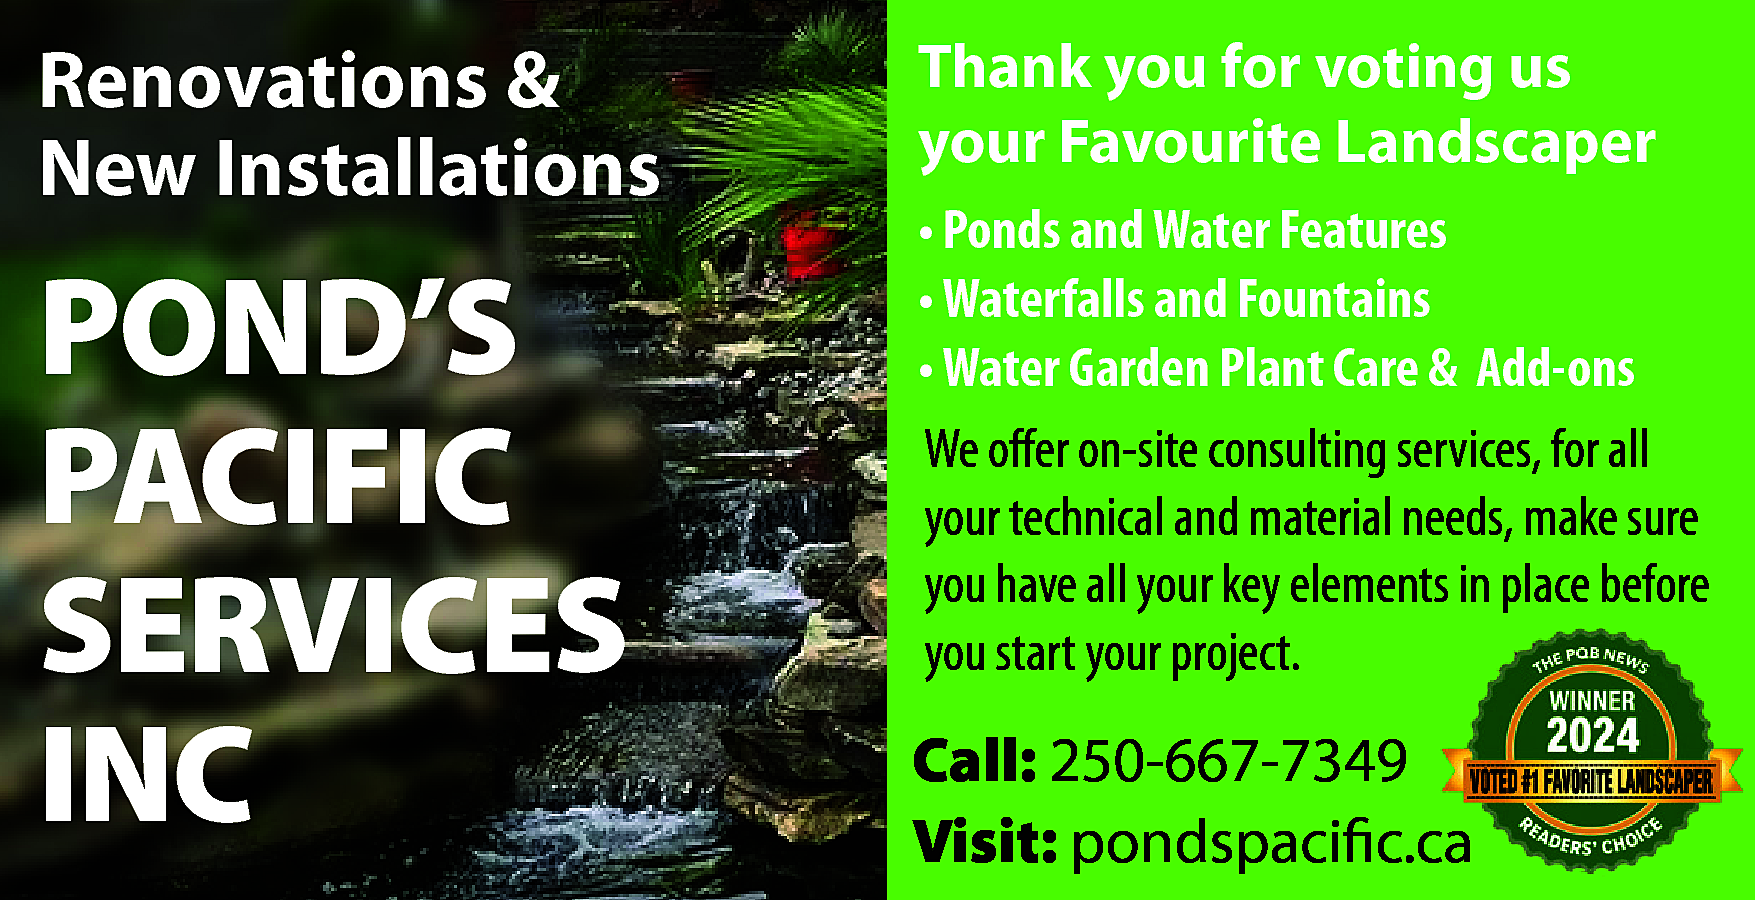 Renovations & <br>New Installations <br>  Renovations &  New Installations    POND’S  PACIFIC  SERVICES  INC    Thank you for voting us  your Favourite Landscaper  • Ponds and Water Features  • Waterfalls and Fountains  • Water Garden Plant Care & Add-ons  We offer on-site consulting services, for all  your technical and material needs, make sure  you have all your key elements in place before  you start your project.    Call: 250-667-7349  Visit: pondspacific.ca    